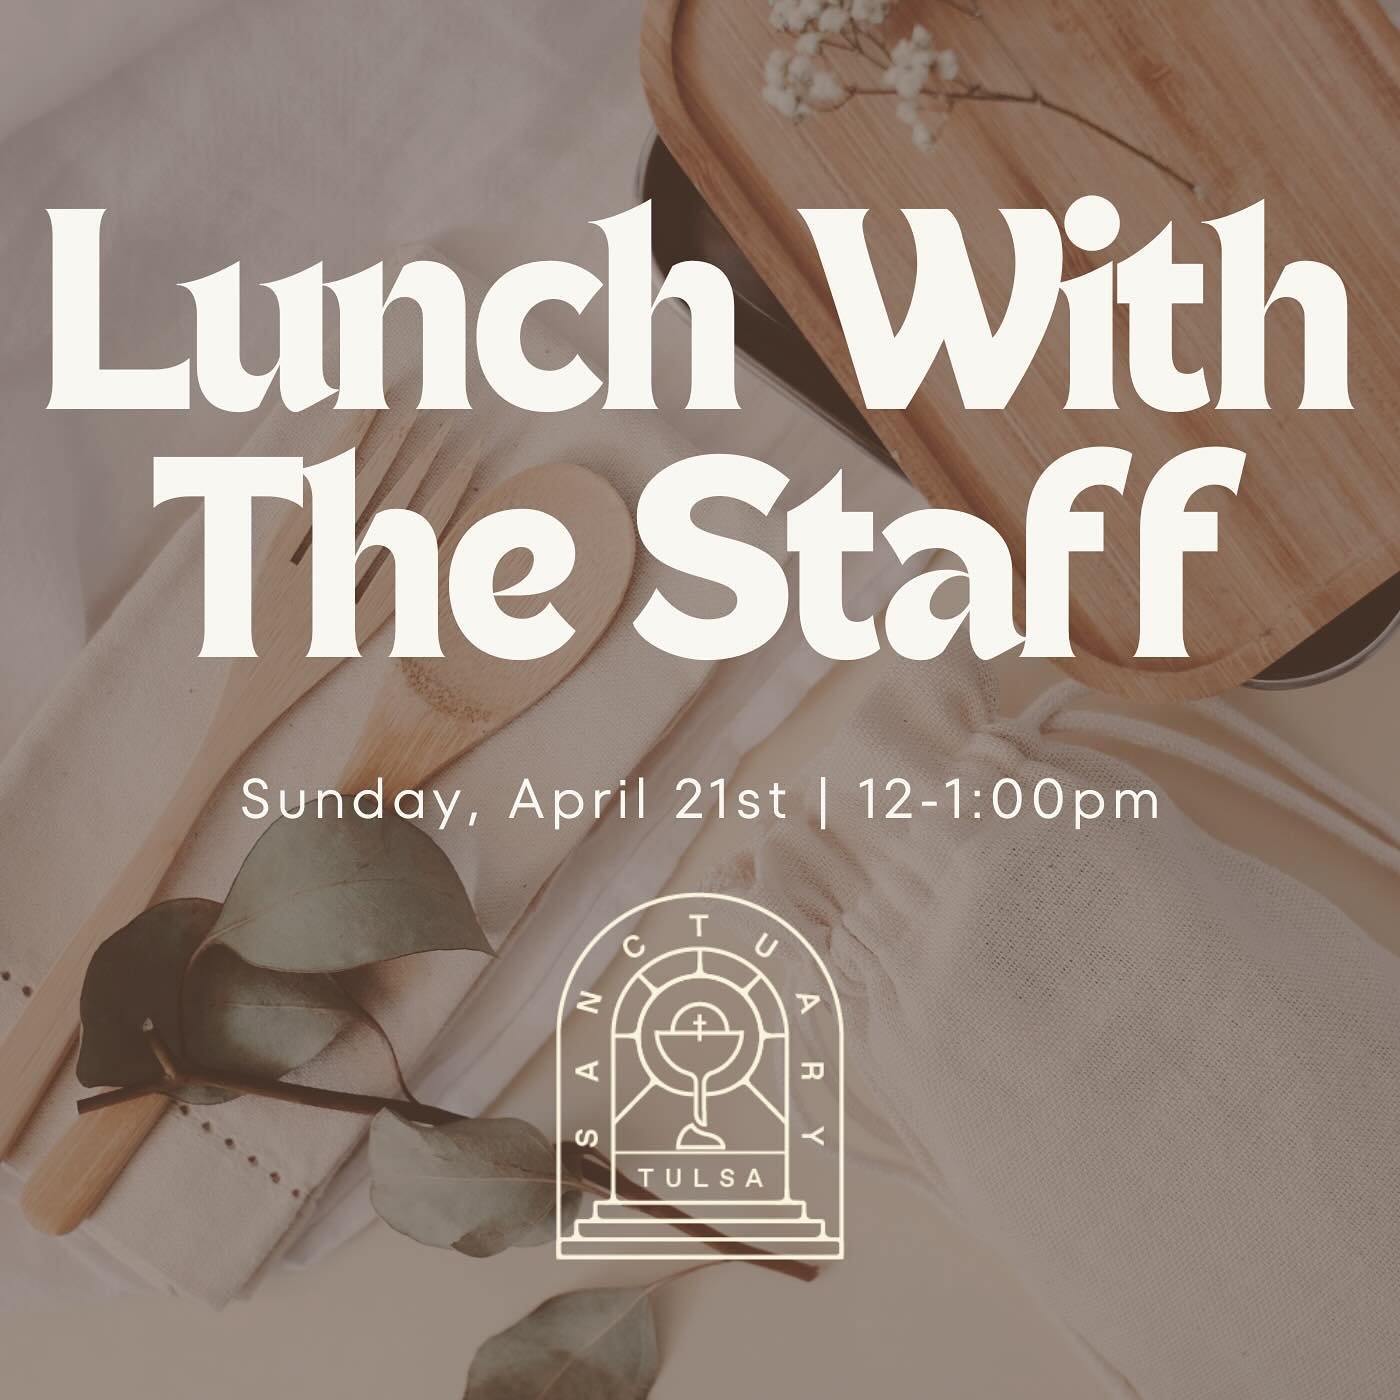 Join us for Lunch with the Staff on Sunday, April 21st immediately following service. We&rsquo;ll share a meal and a conversation about who Sanctuary is, and give you space to ask questions about our community.

This is open to anyone who is new(ish)